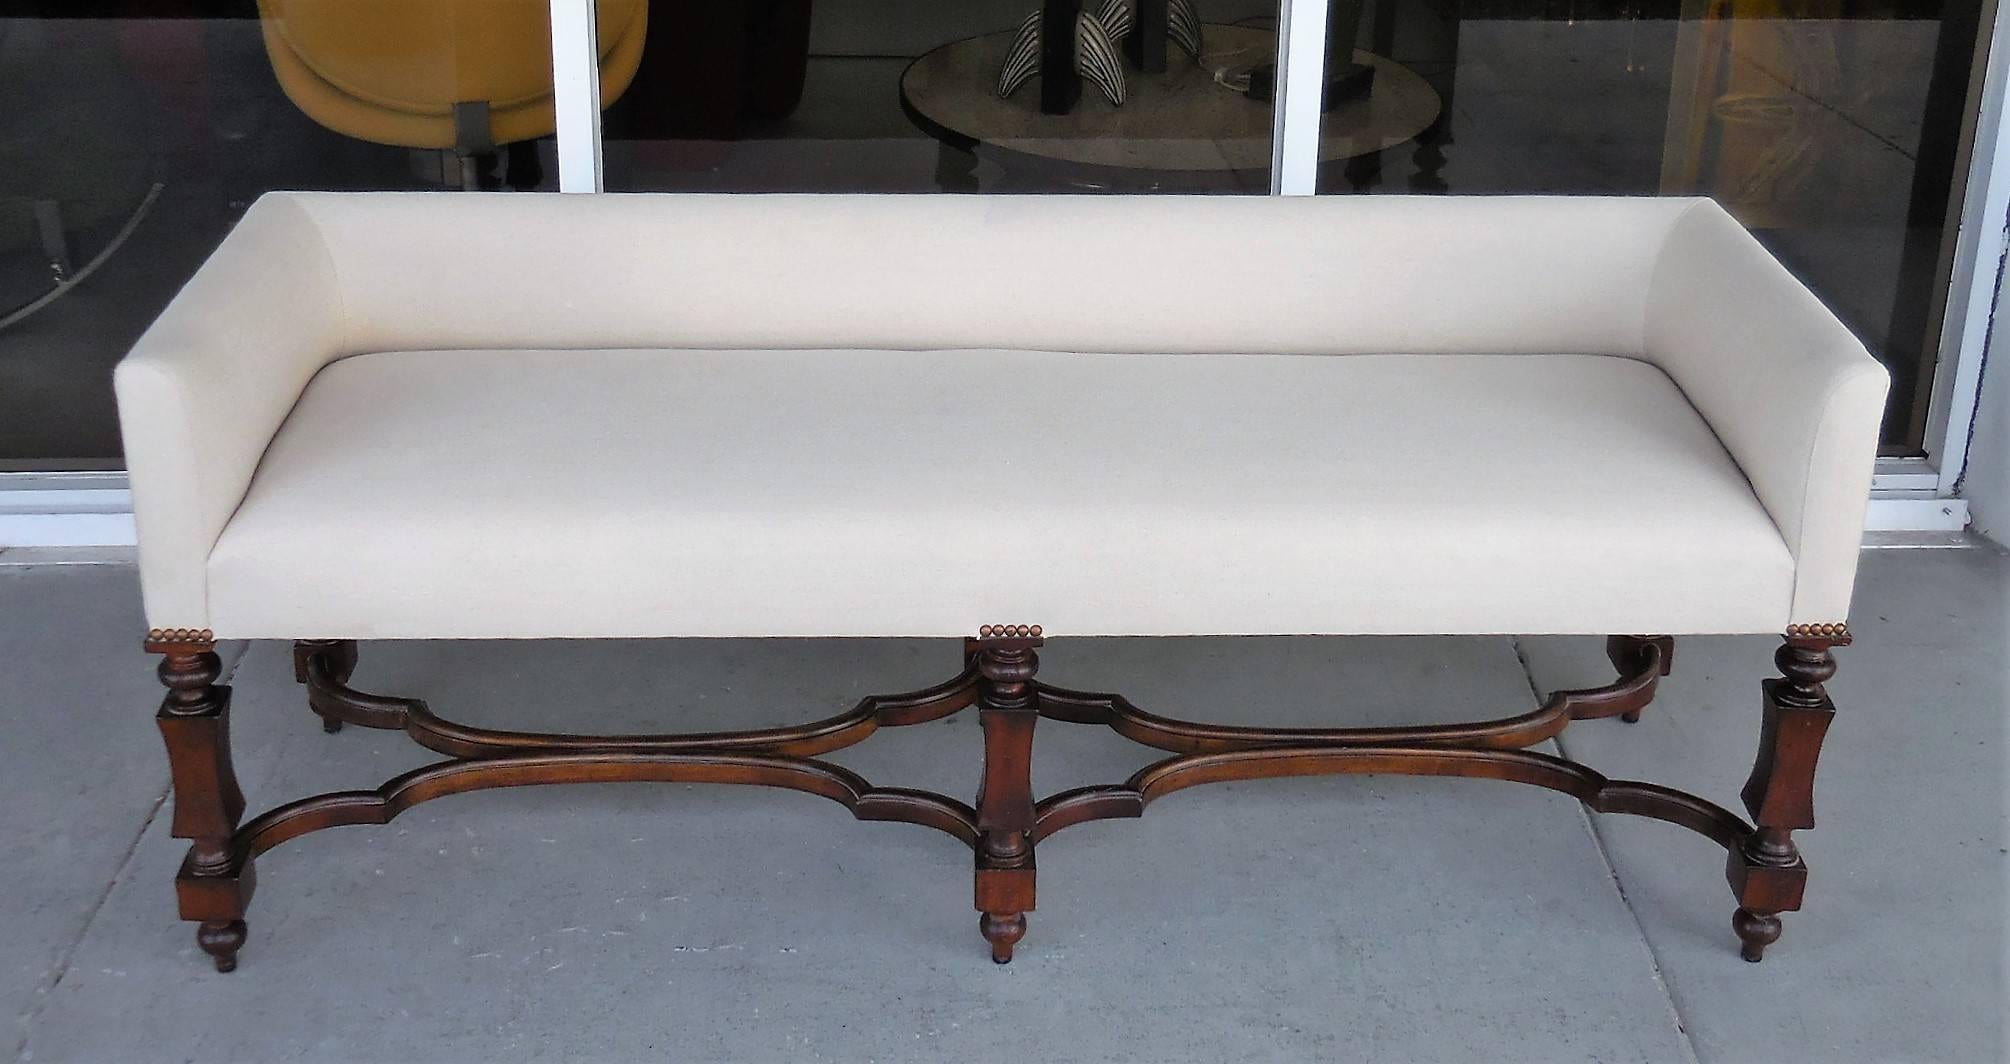 A long bench or settee by Baker. Wood frame and linen upholstered seat. Very versatile, could be standing by itself or at the foot of the bed. Would work with a queen or king-size bed.